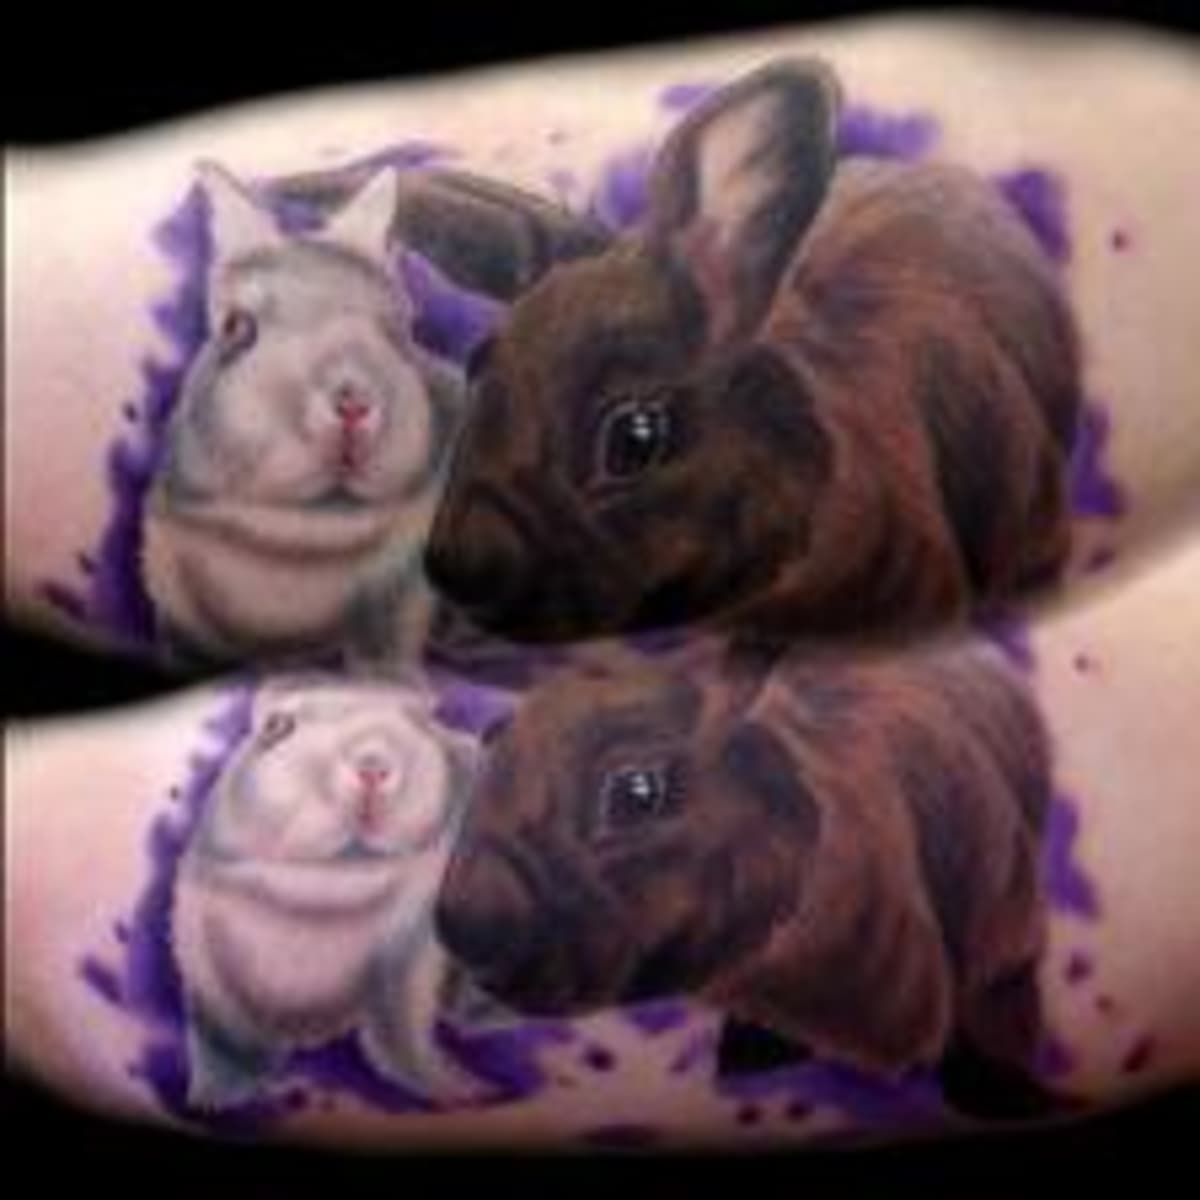 Micro-realistic style White Rabbit tattoo done on the